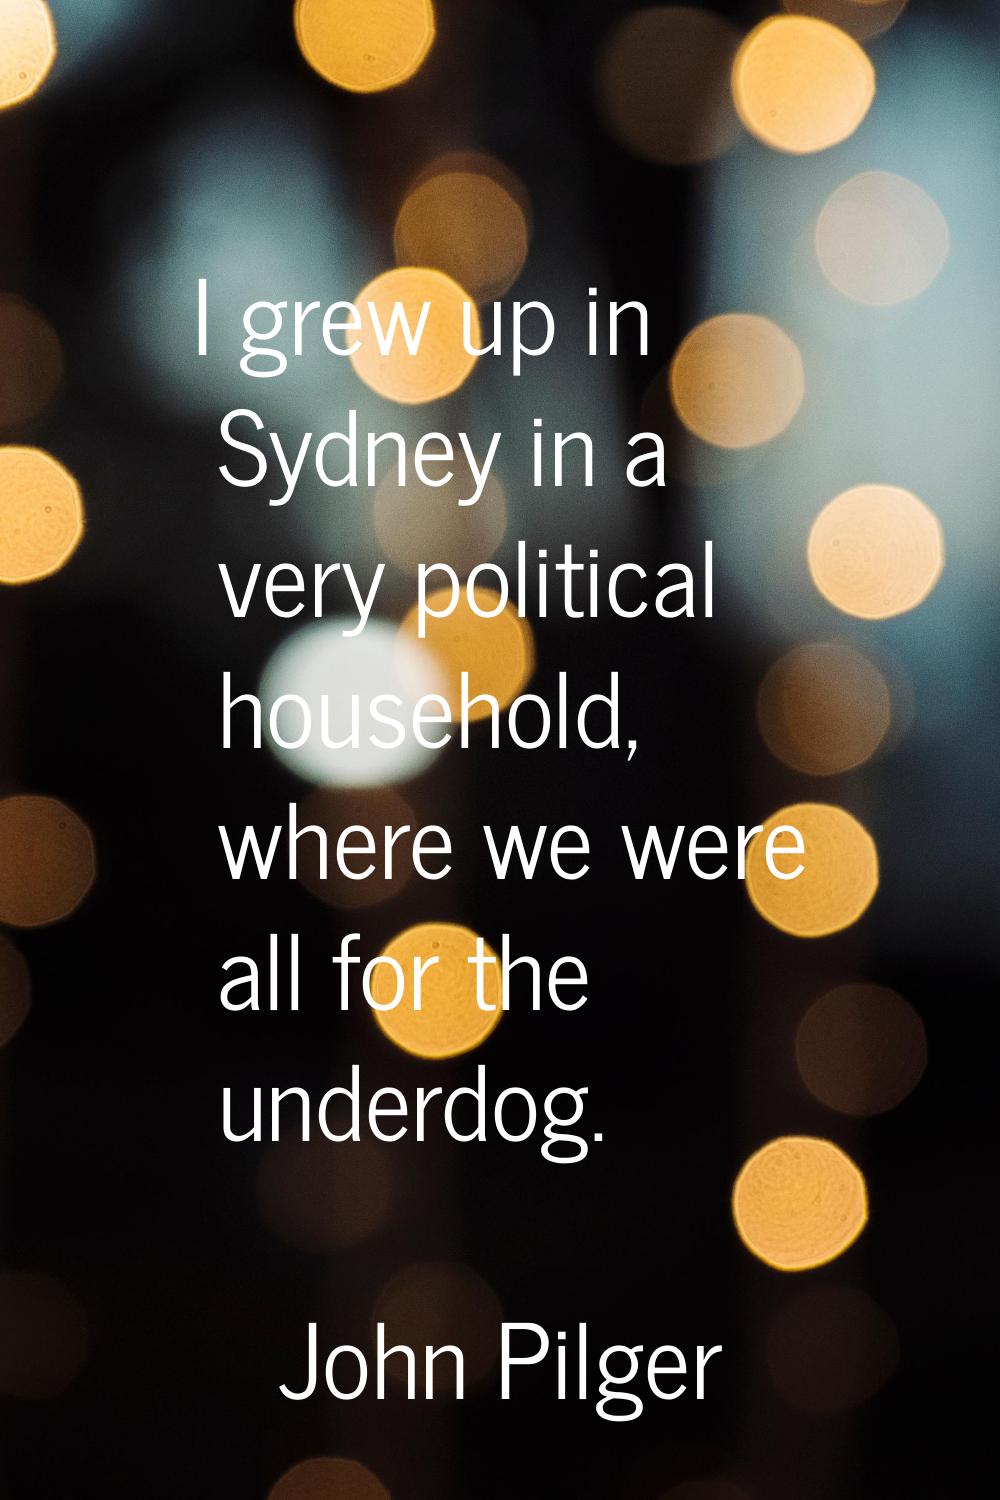 I grew up in Sydney in a very political household, where we were all for the underdog.